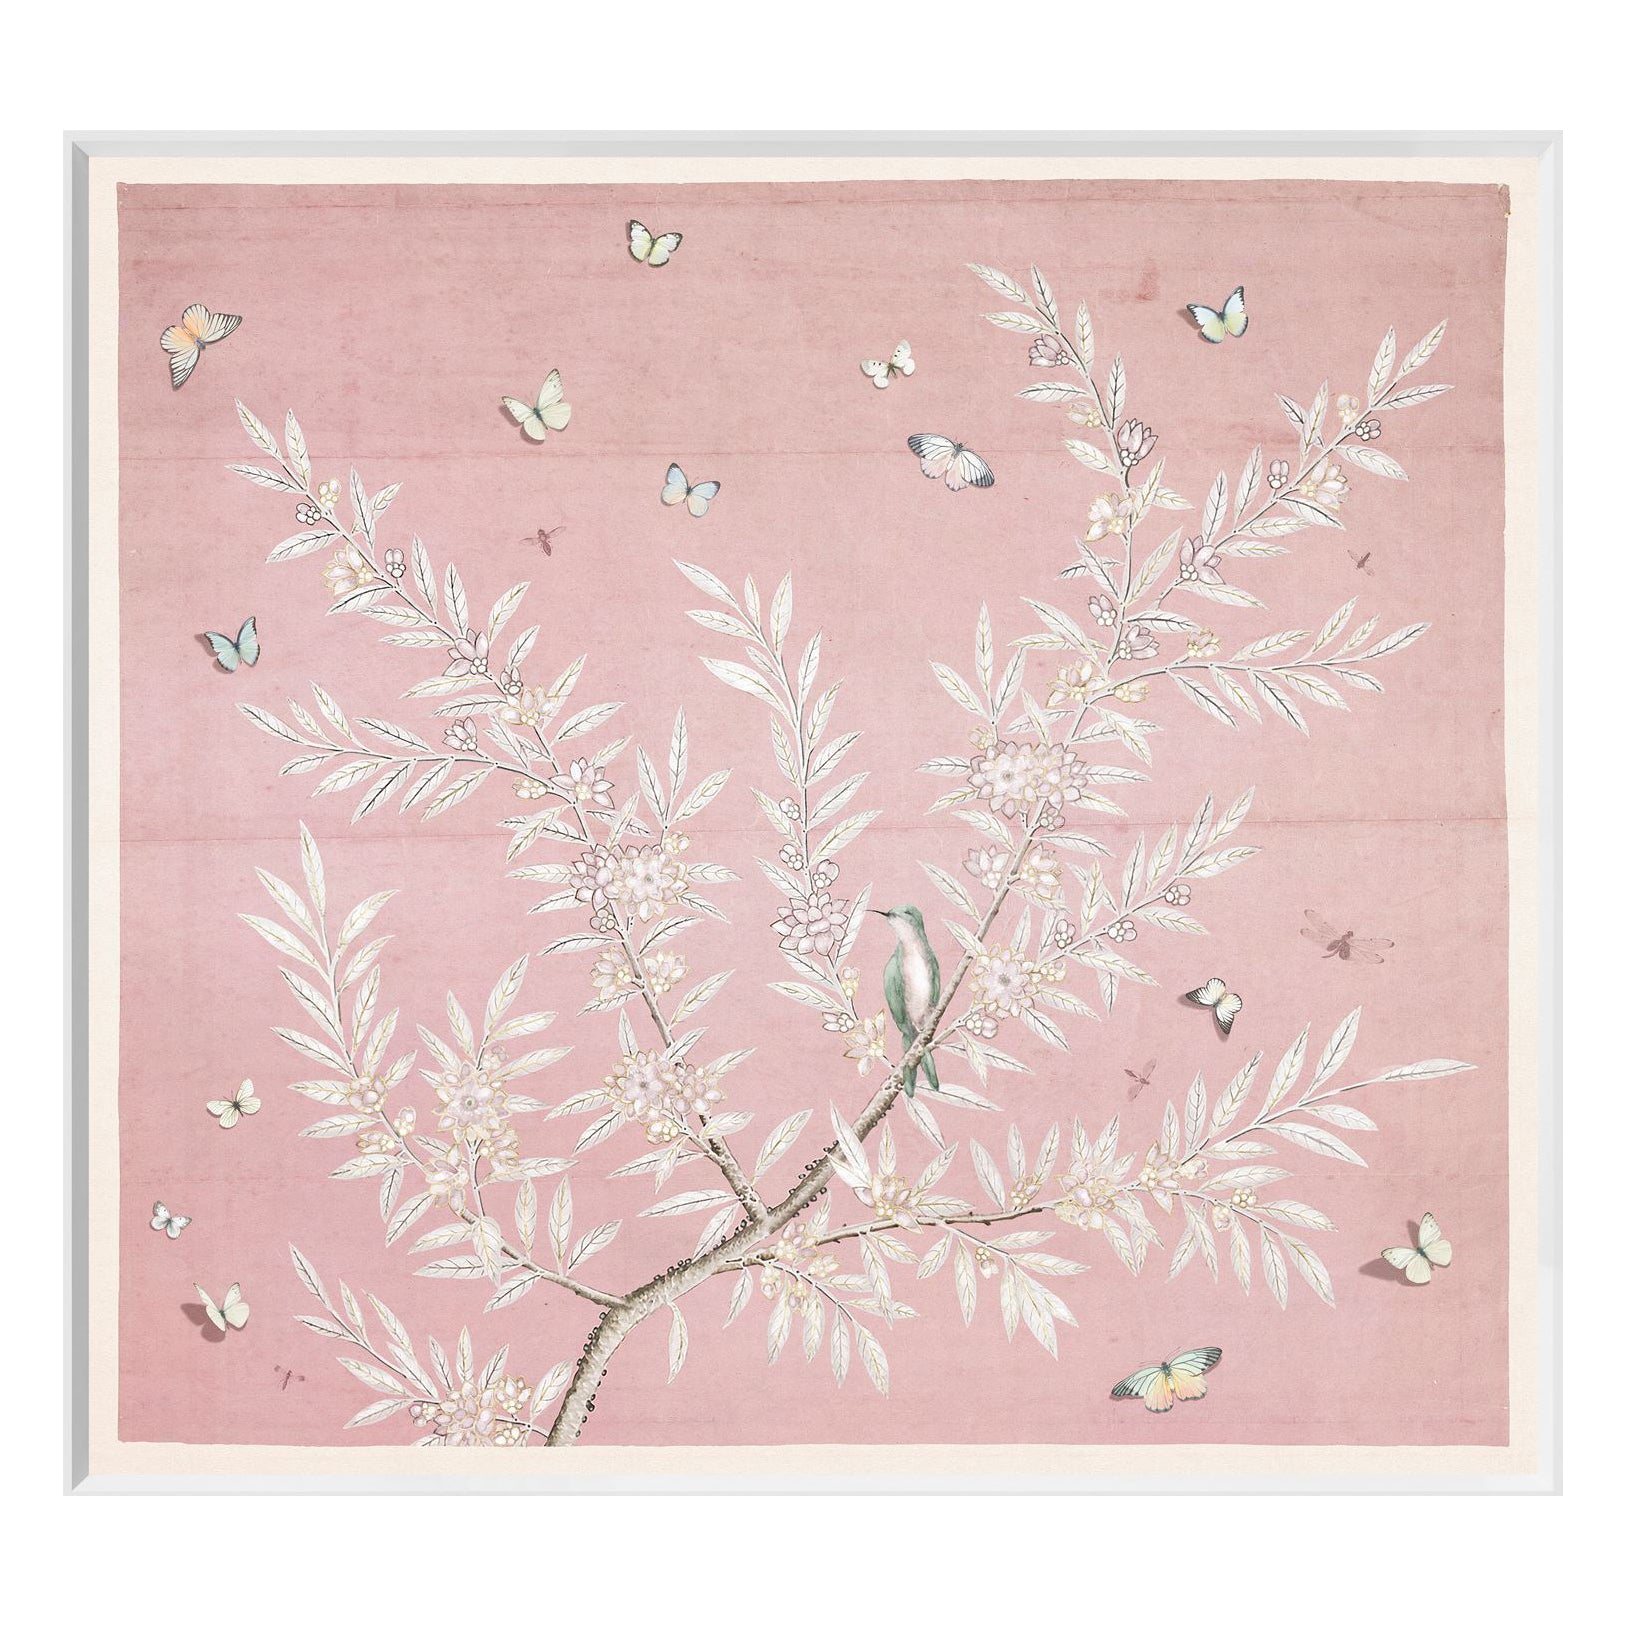 Cherry Blossoms - Black Rooster Maison